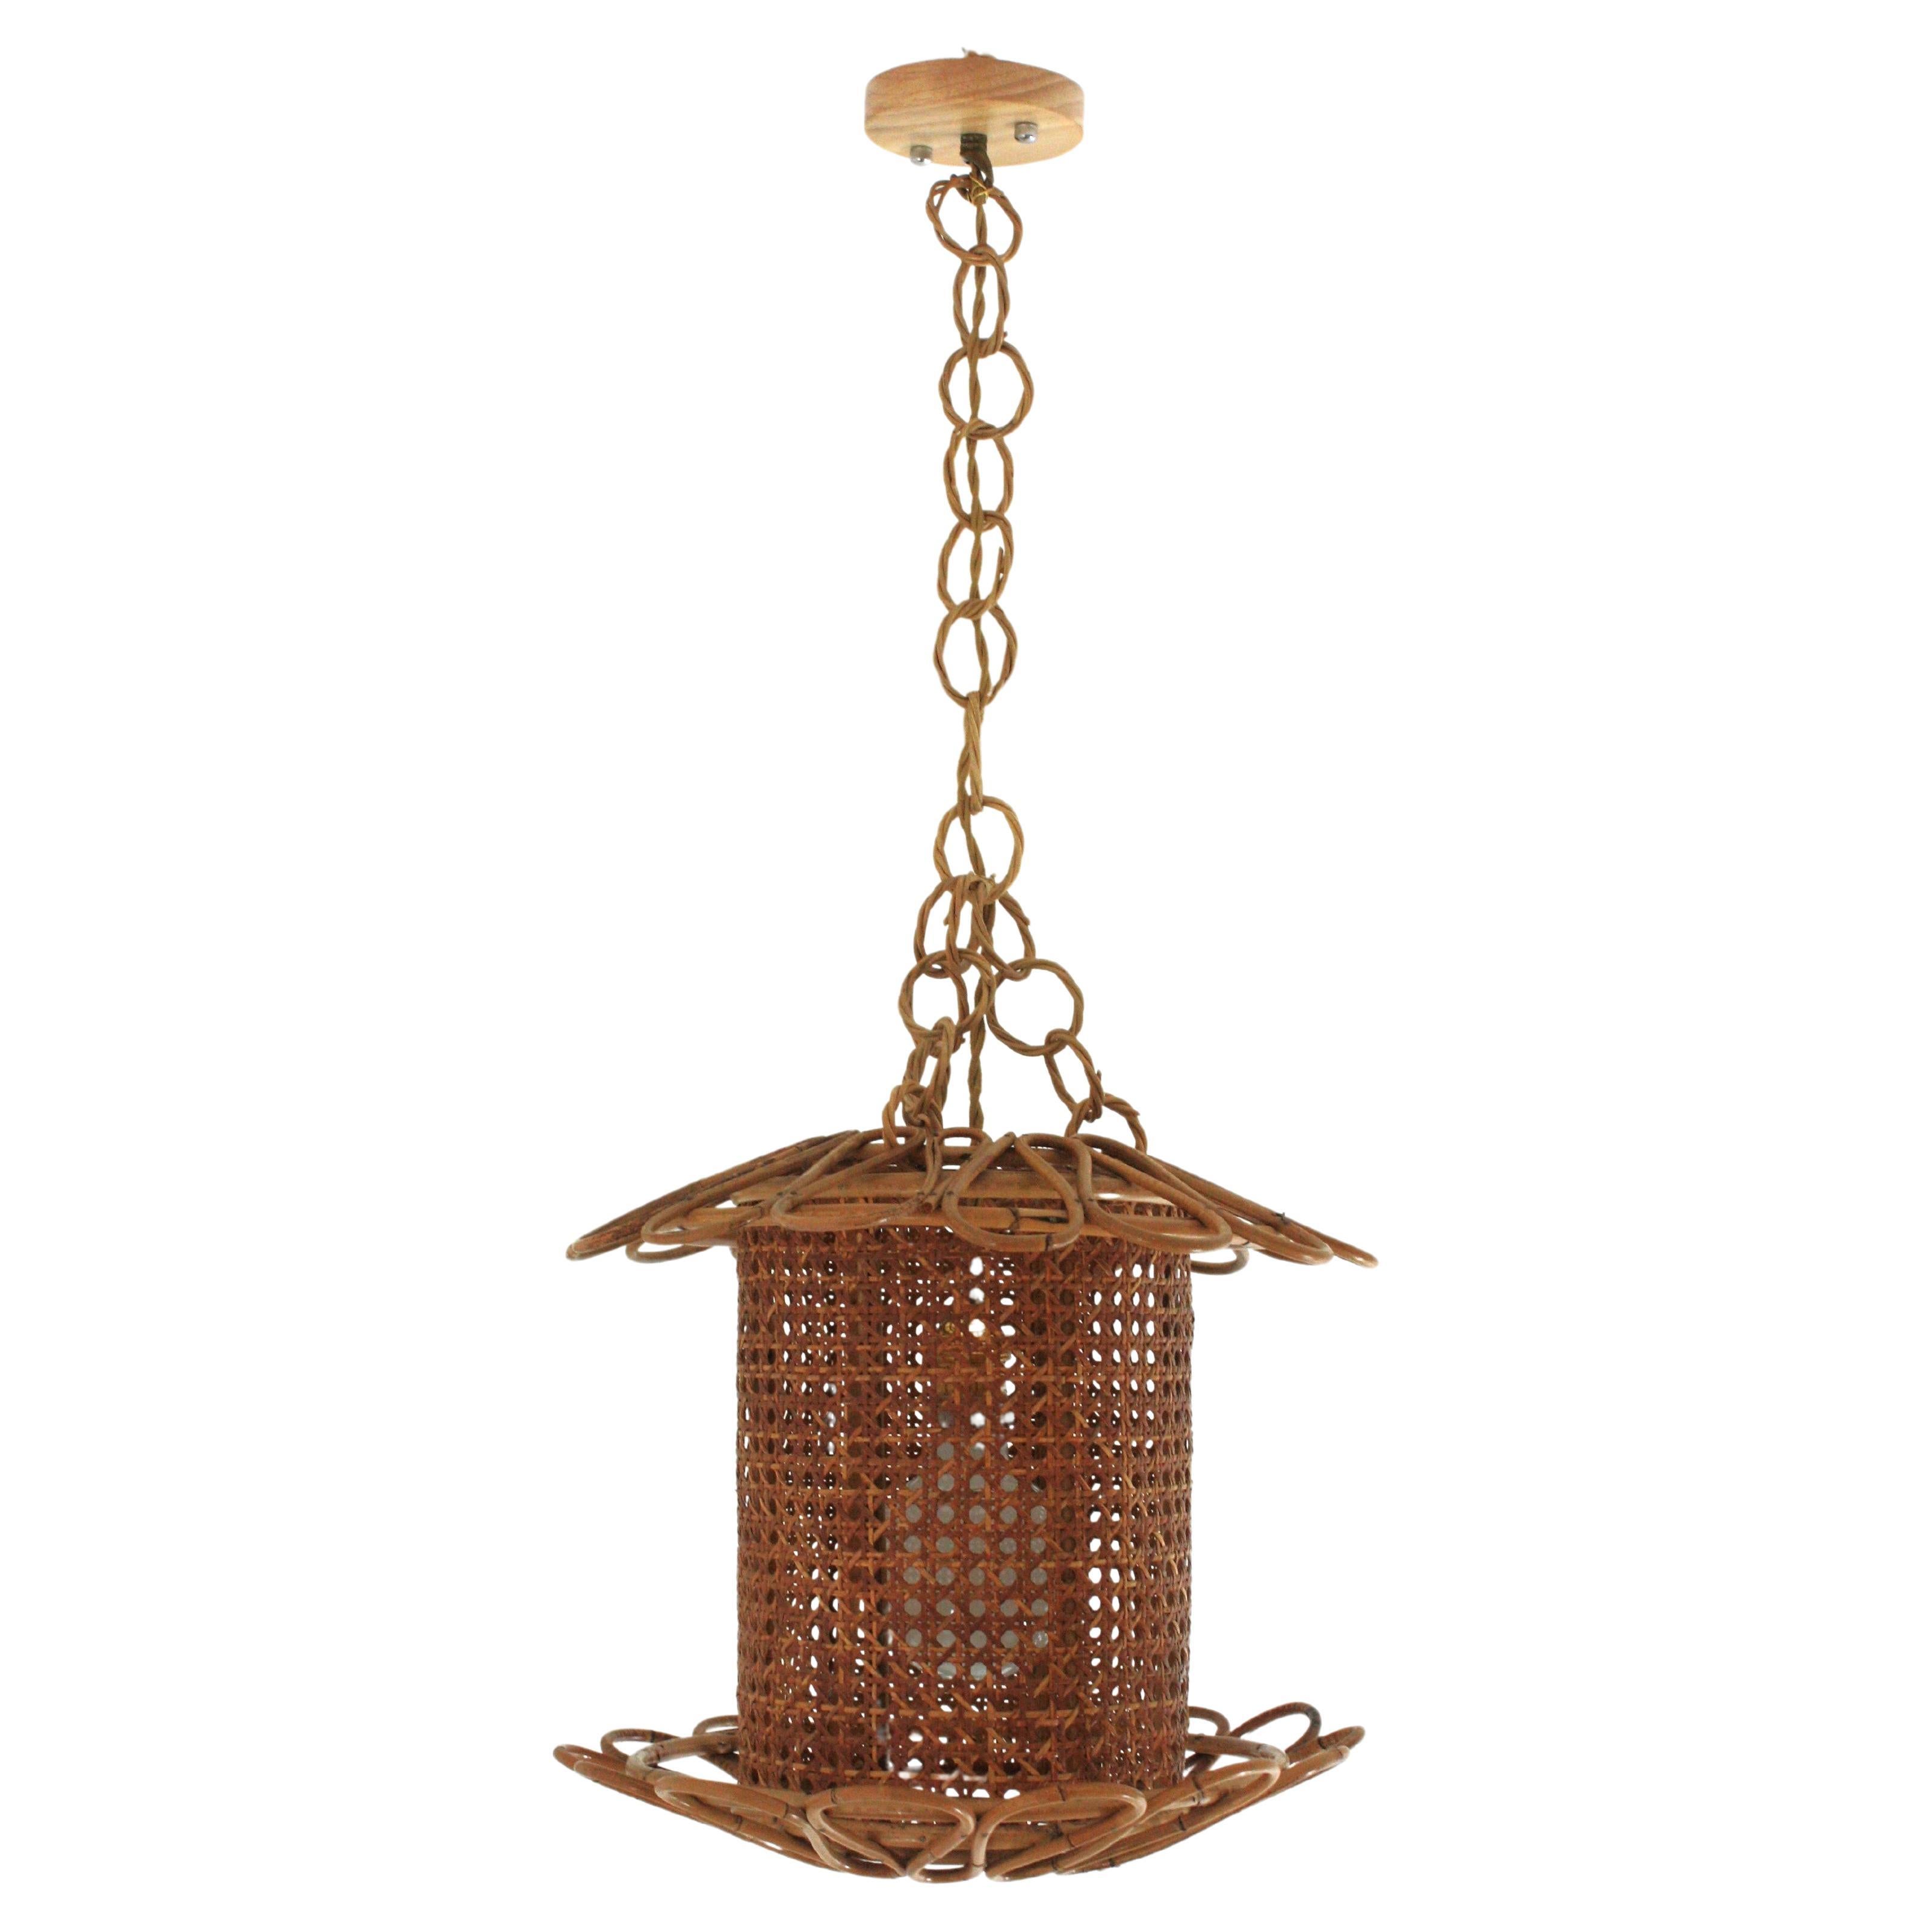 Mid-century Modern Rattan Woven Wicker Pendant Light
Beautiful Mid-Century Modern woven wicker wire and rattan pendant lamp / lantern, Italy, 1950s.
The woven wicker cylindrical shade of this lamp is accented by handcrafted rattan details as petals